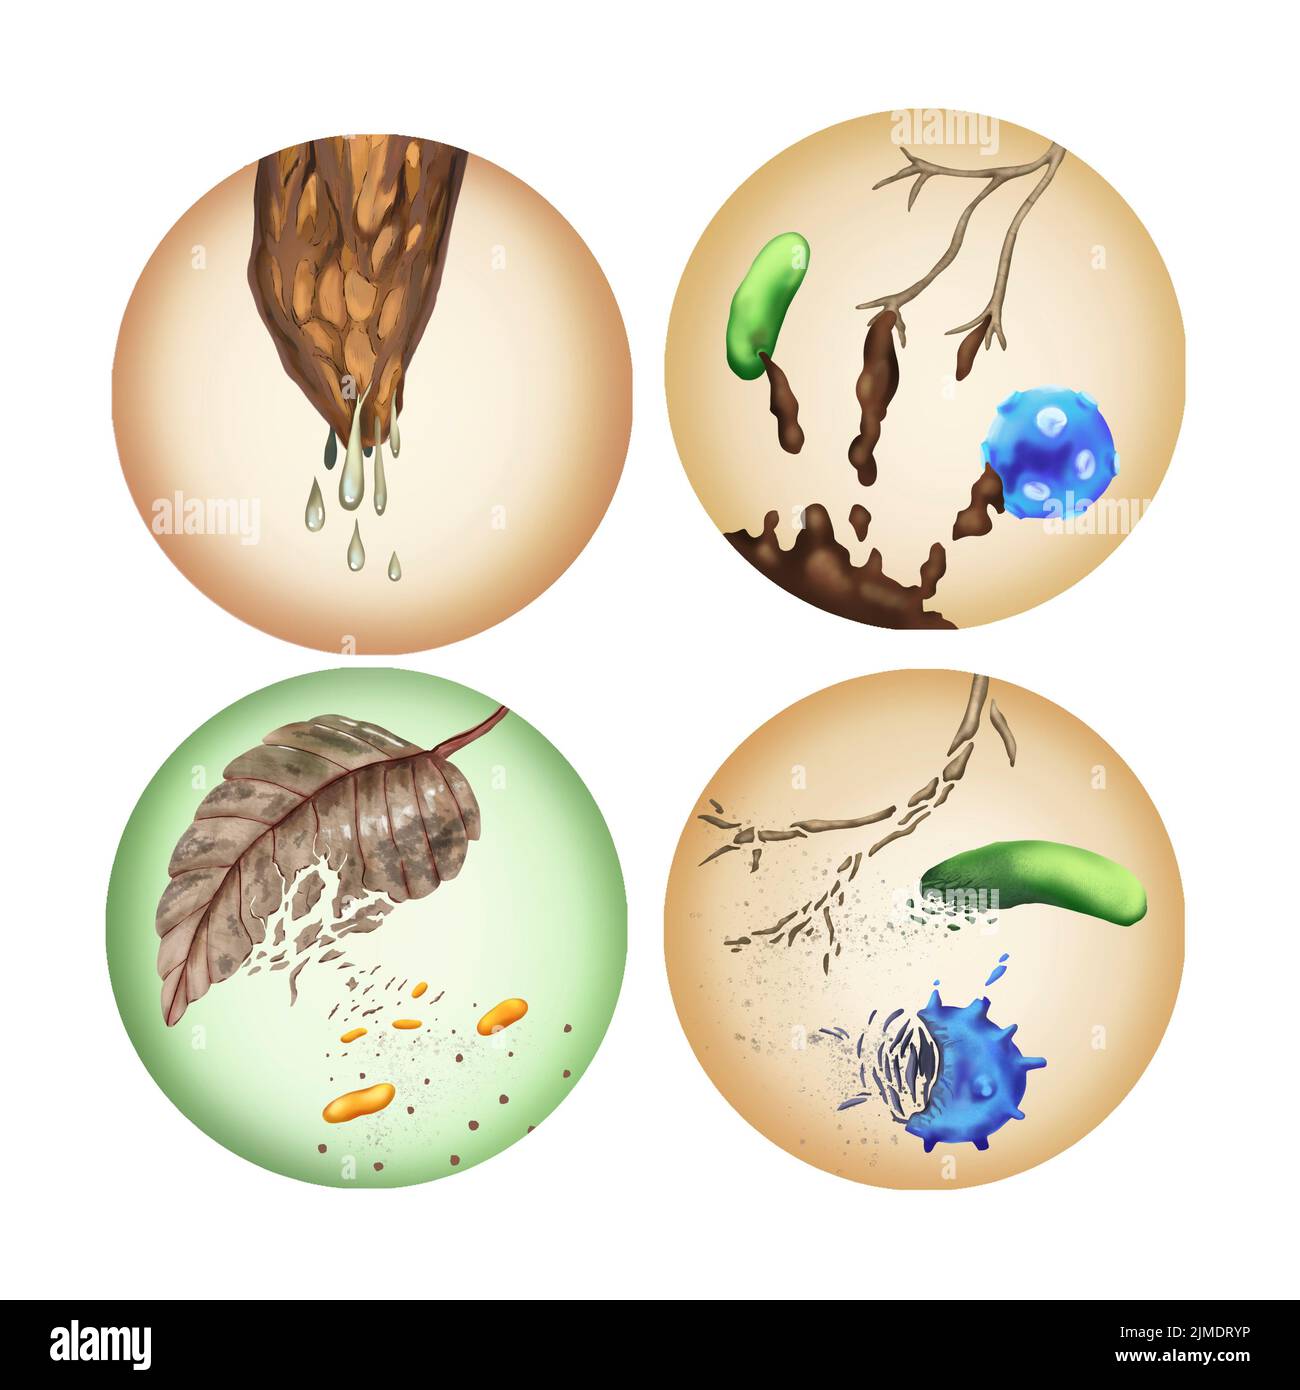 Plant and microbes degrading, illustration Stock Photo